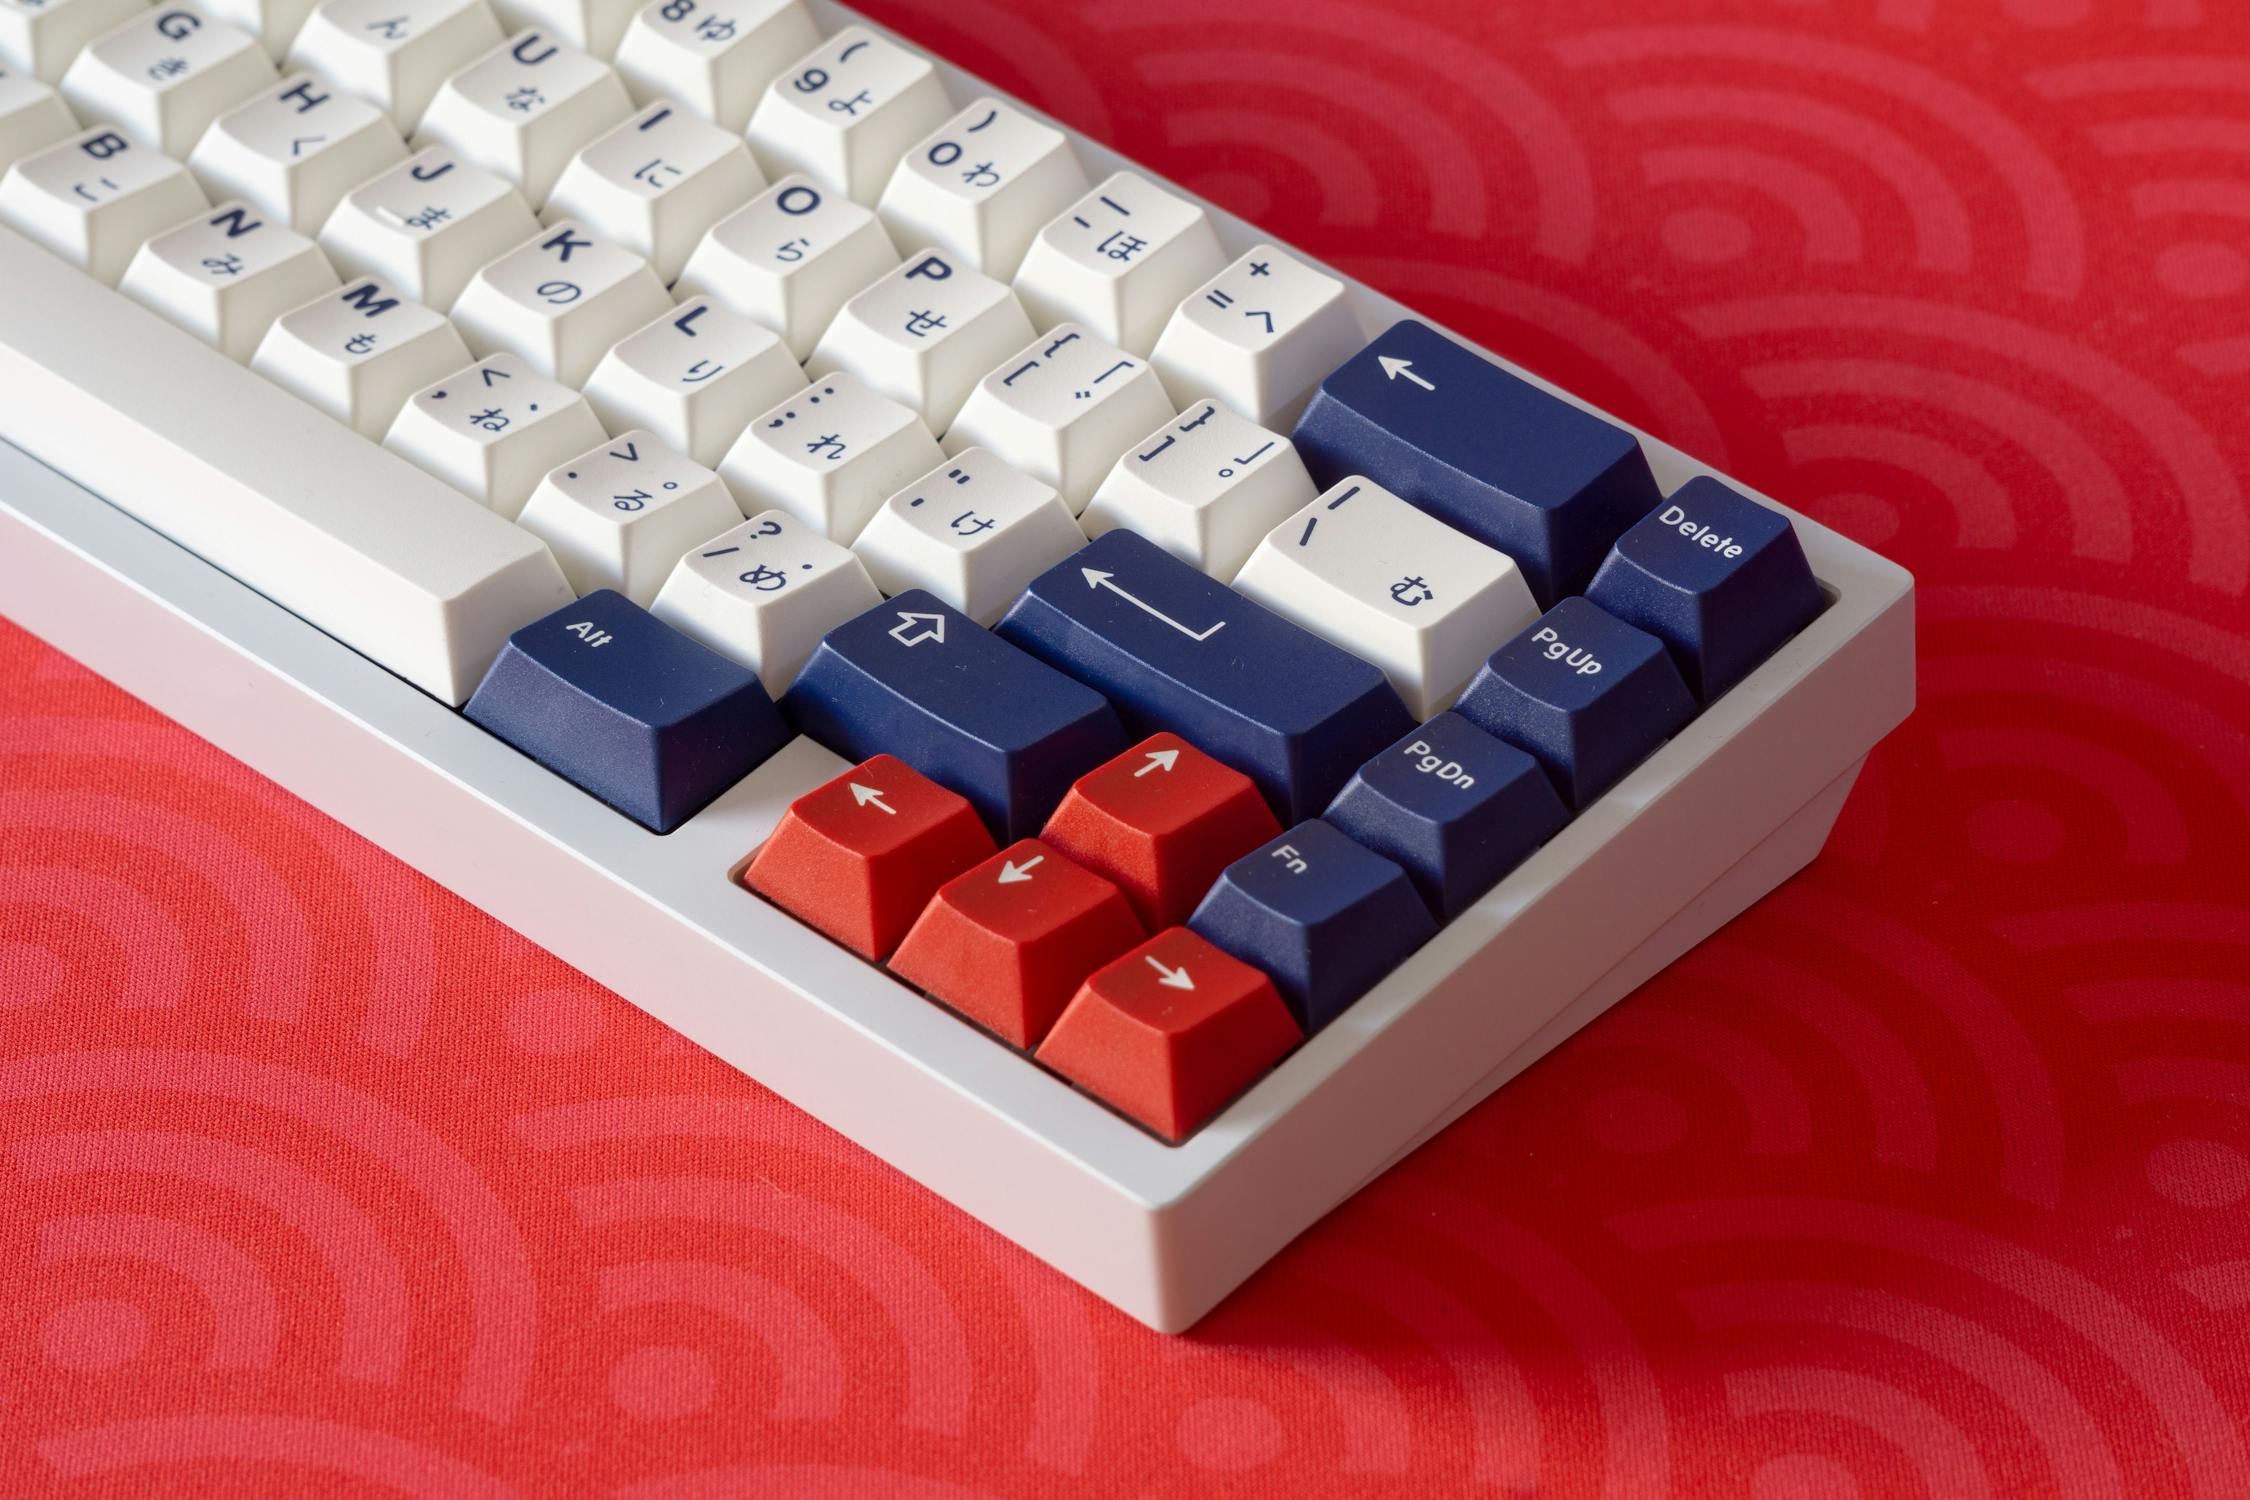 Mechanical keyboard with white, blue, and red keycaps.